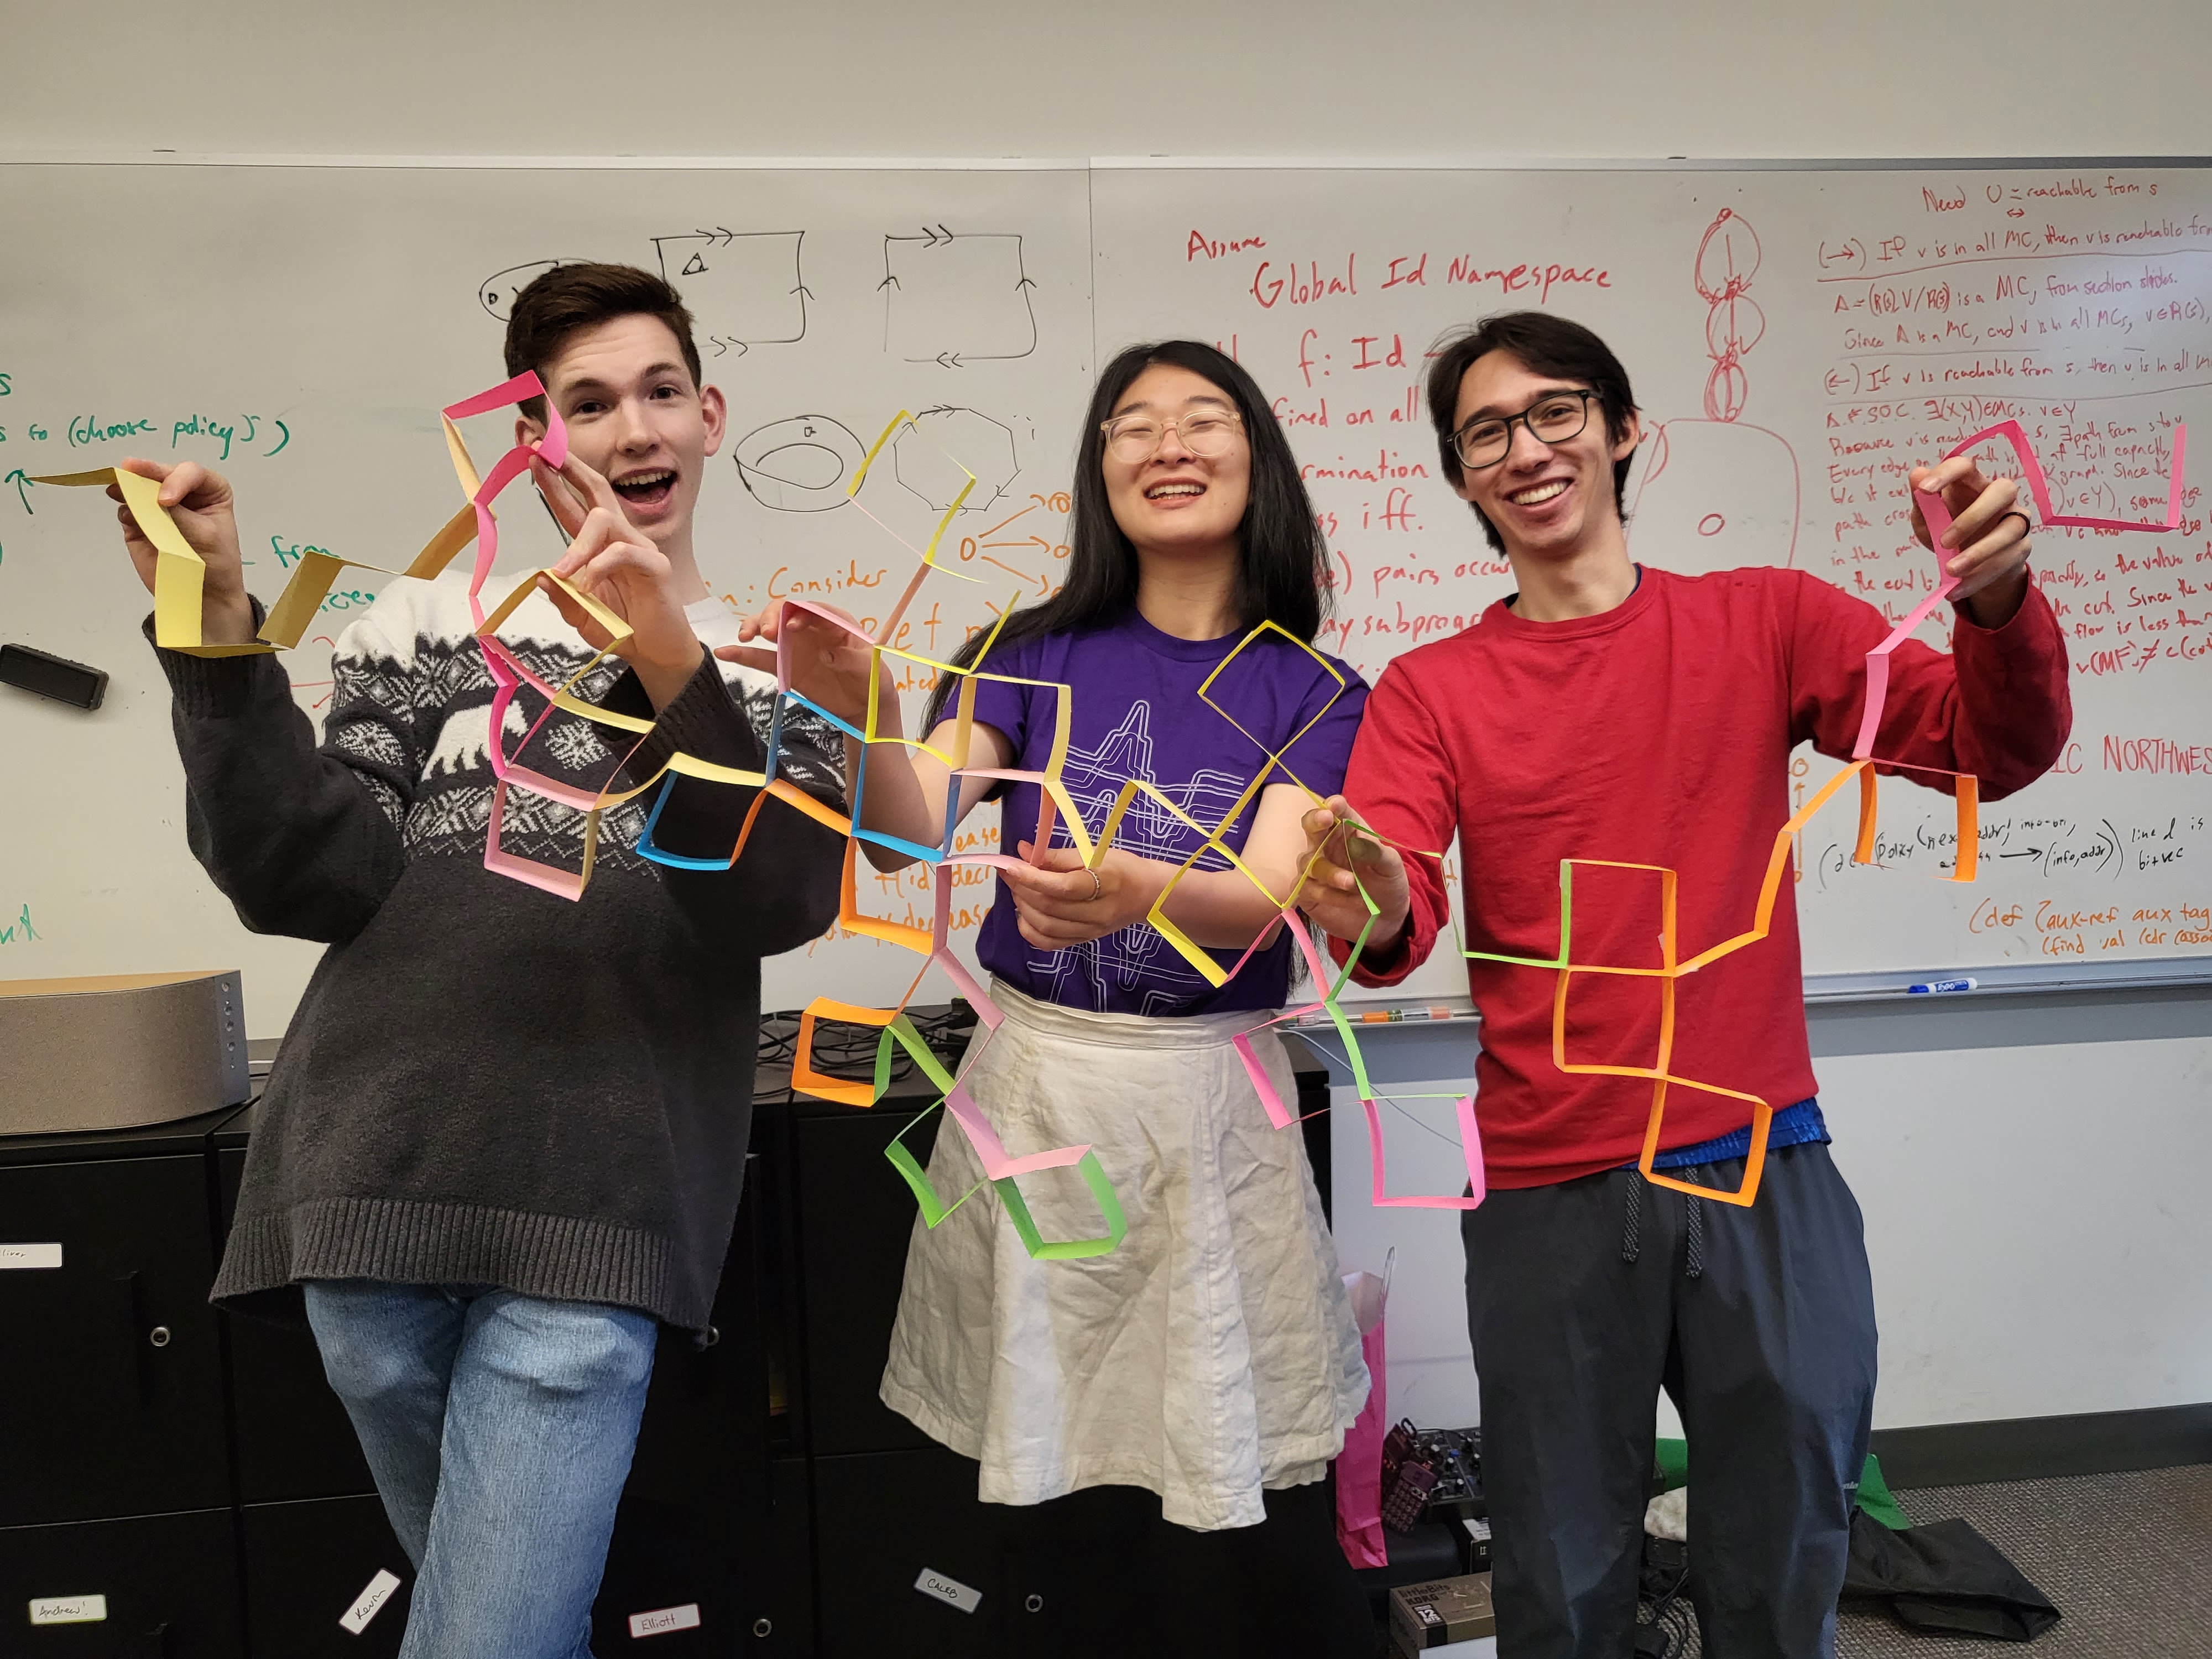 A picture of 3 PLSE students holding a paper dragon curve up